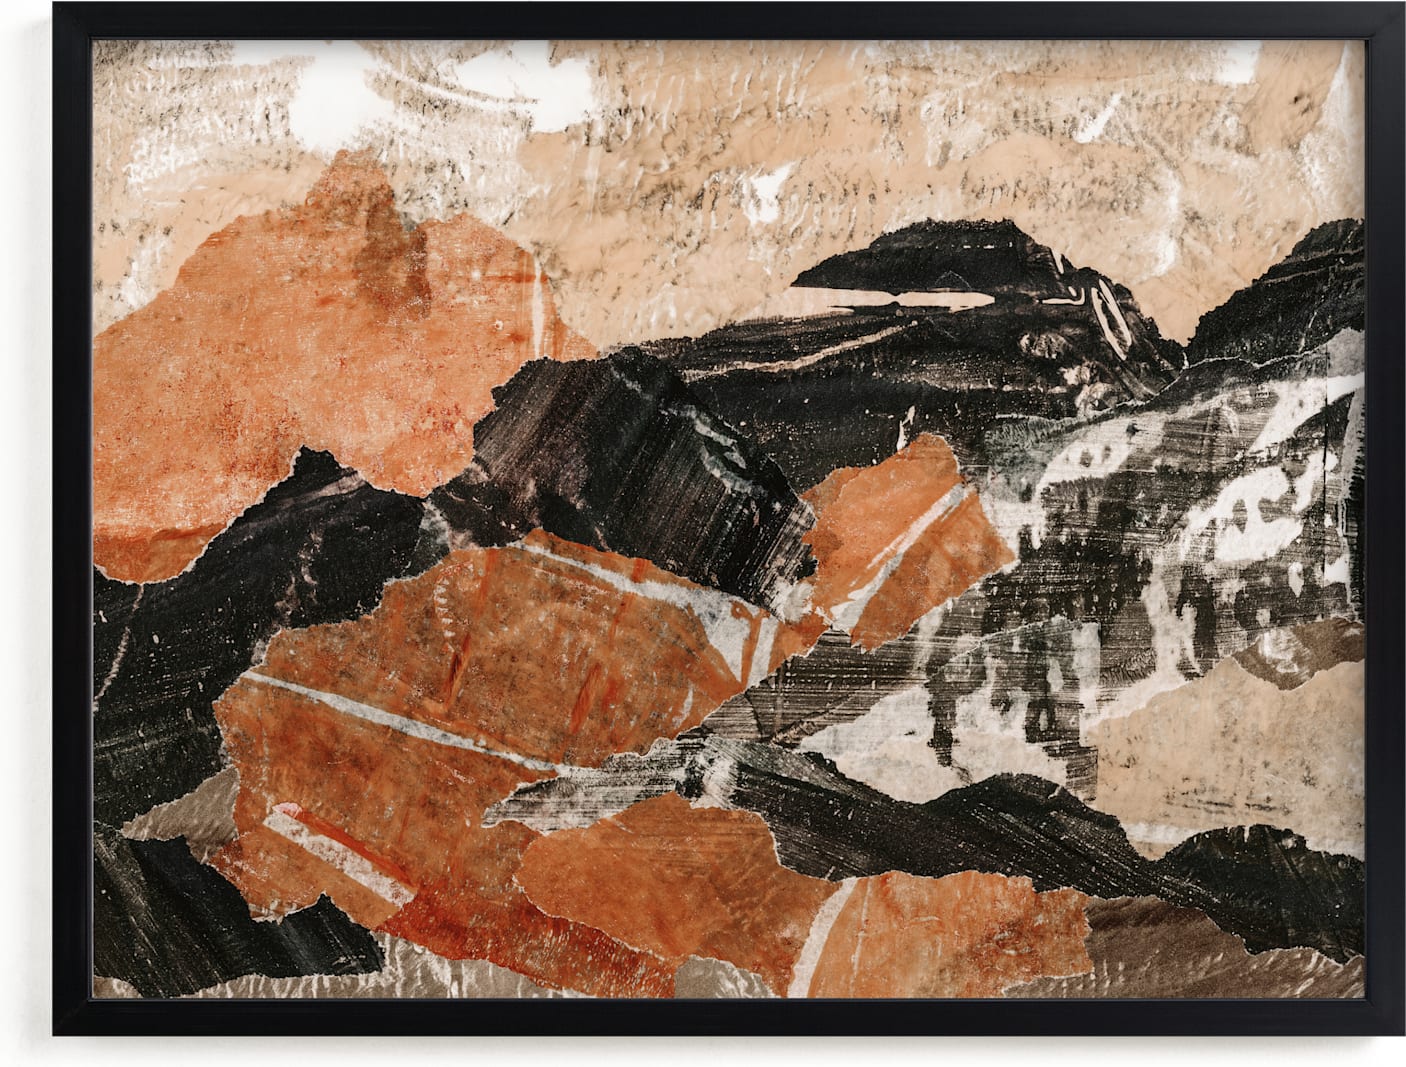 This is a black, beige, orange art by Courtney Crane called On the Rocks.